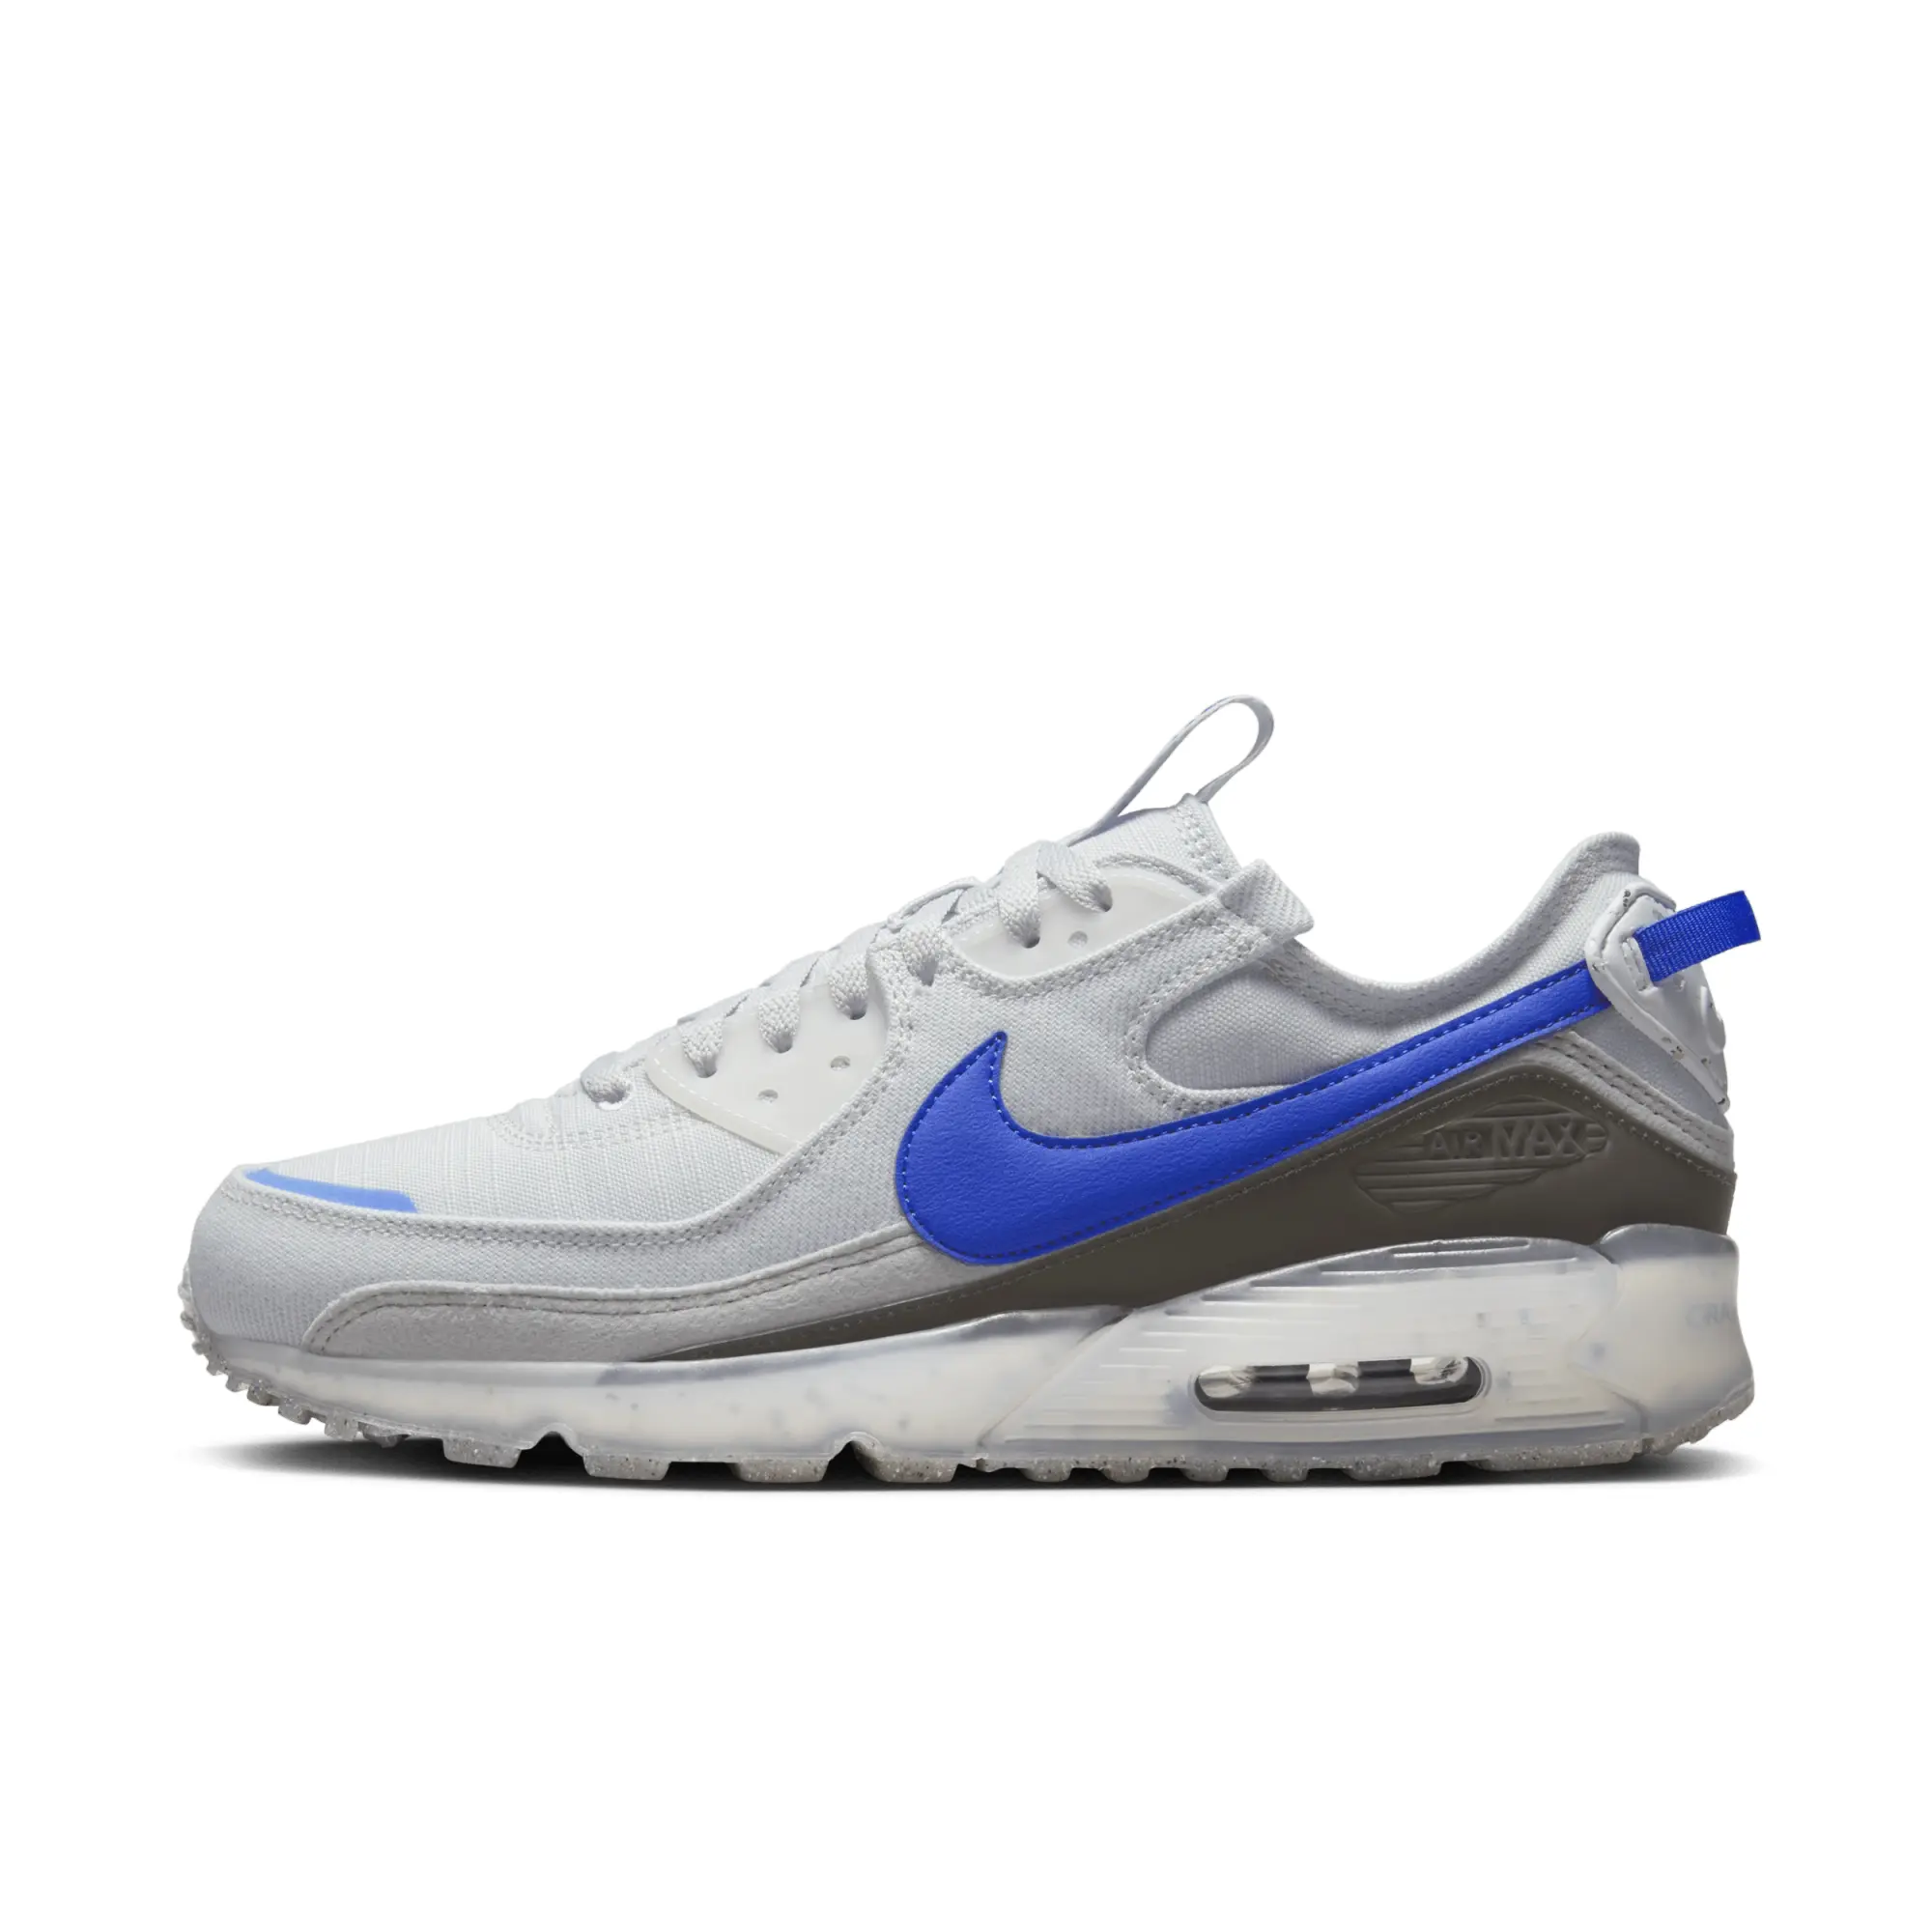 Nike Air Max 90 Terrascape Trainer - Pure Platinum / Hyper Royal / Wolf Grey